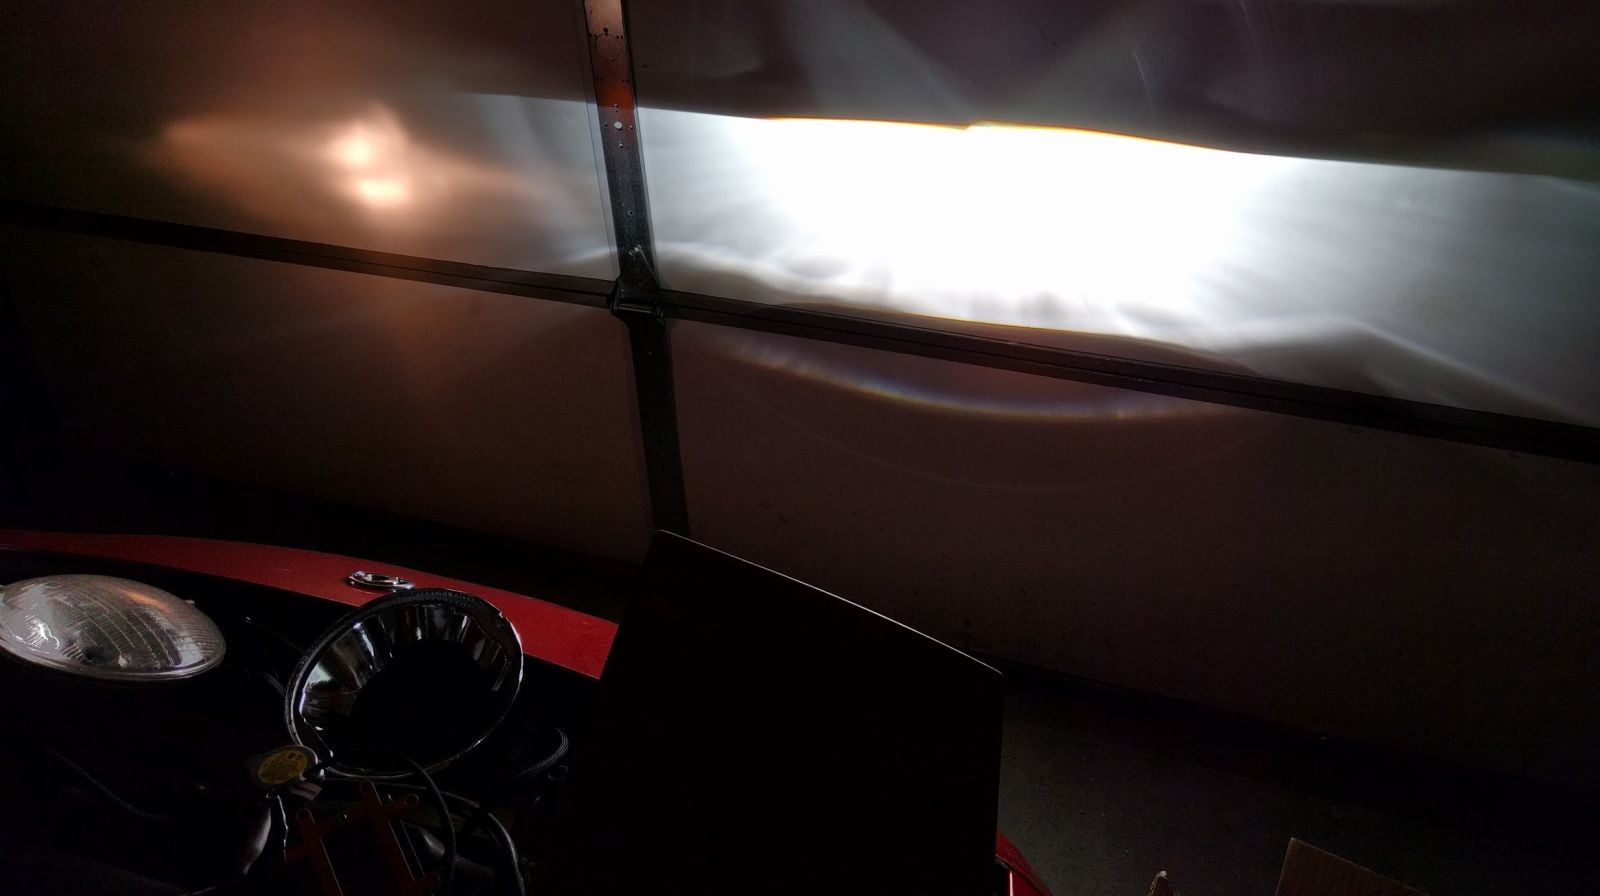 This is why sealed beams should be illegal